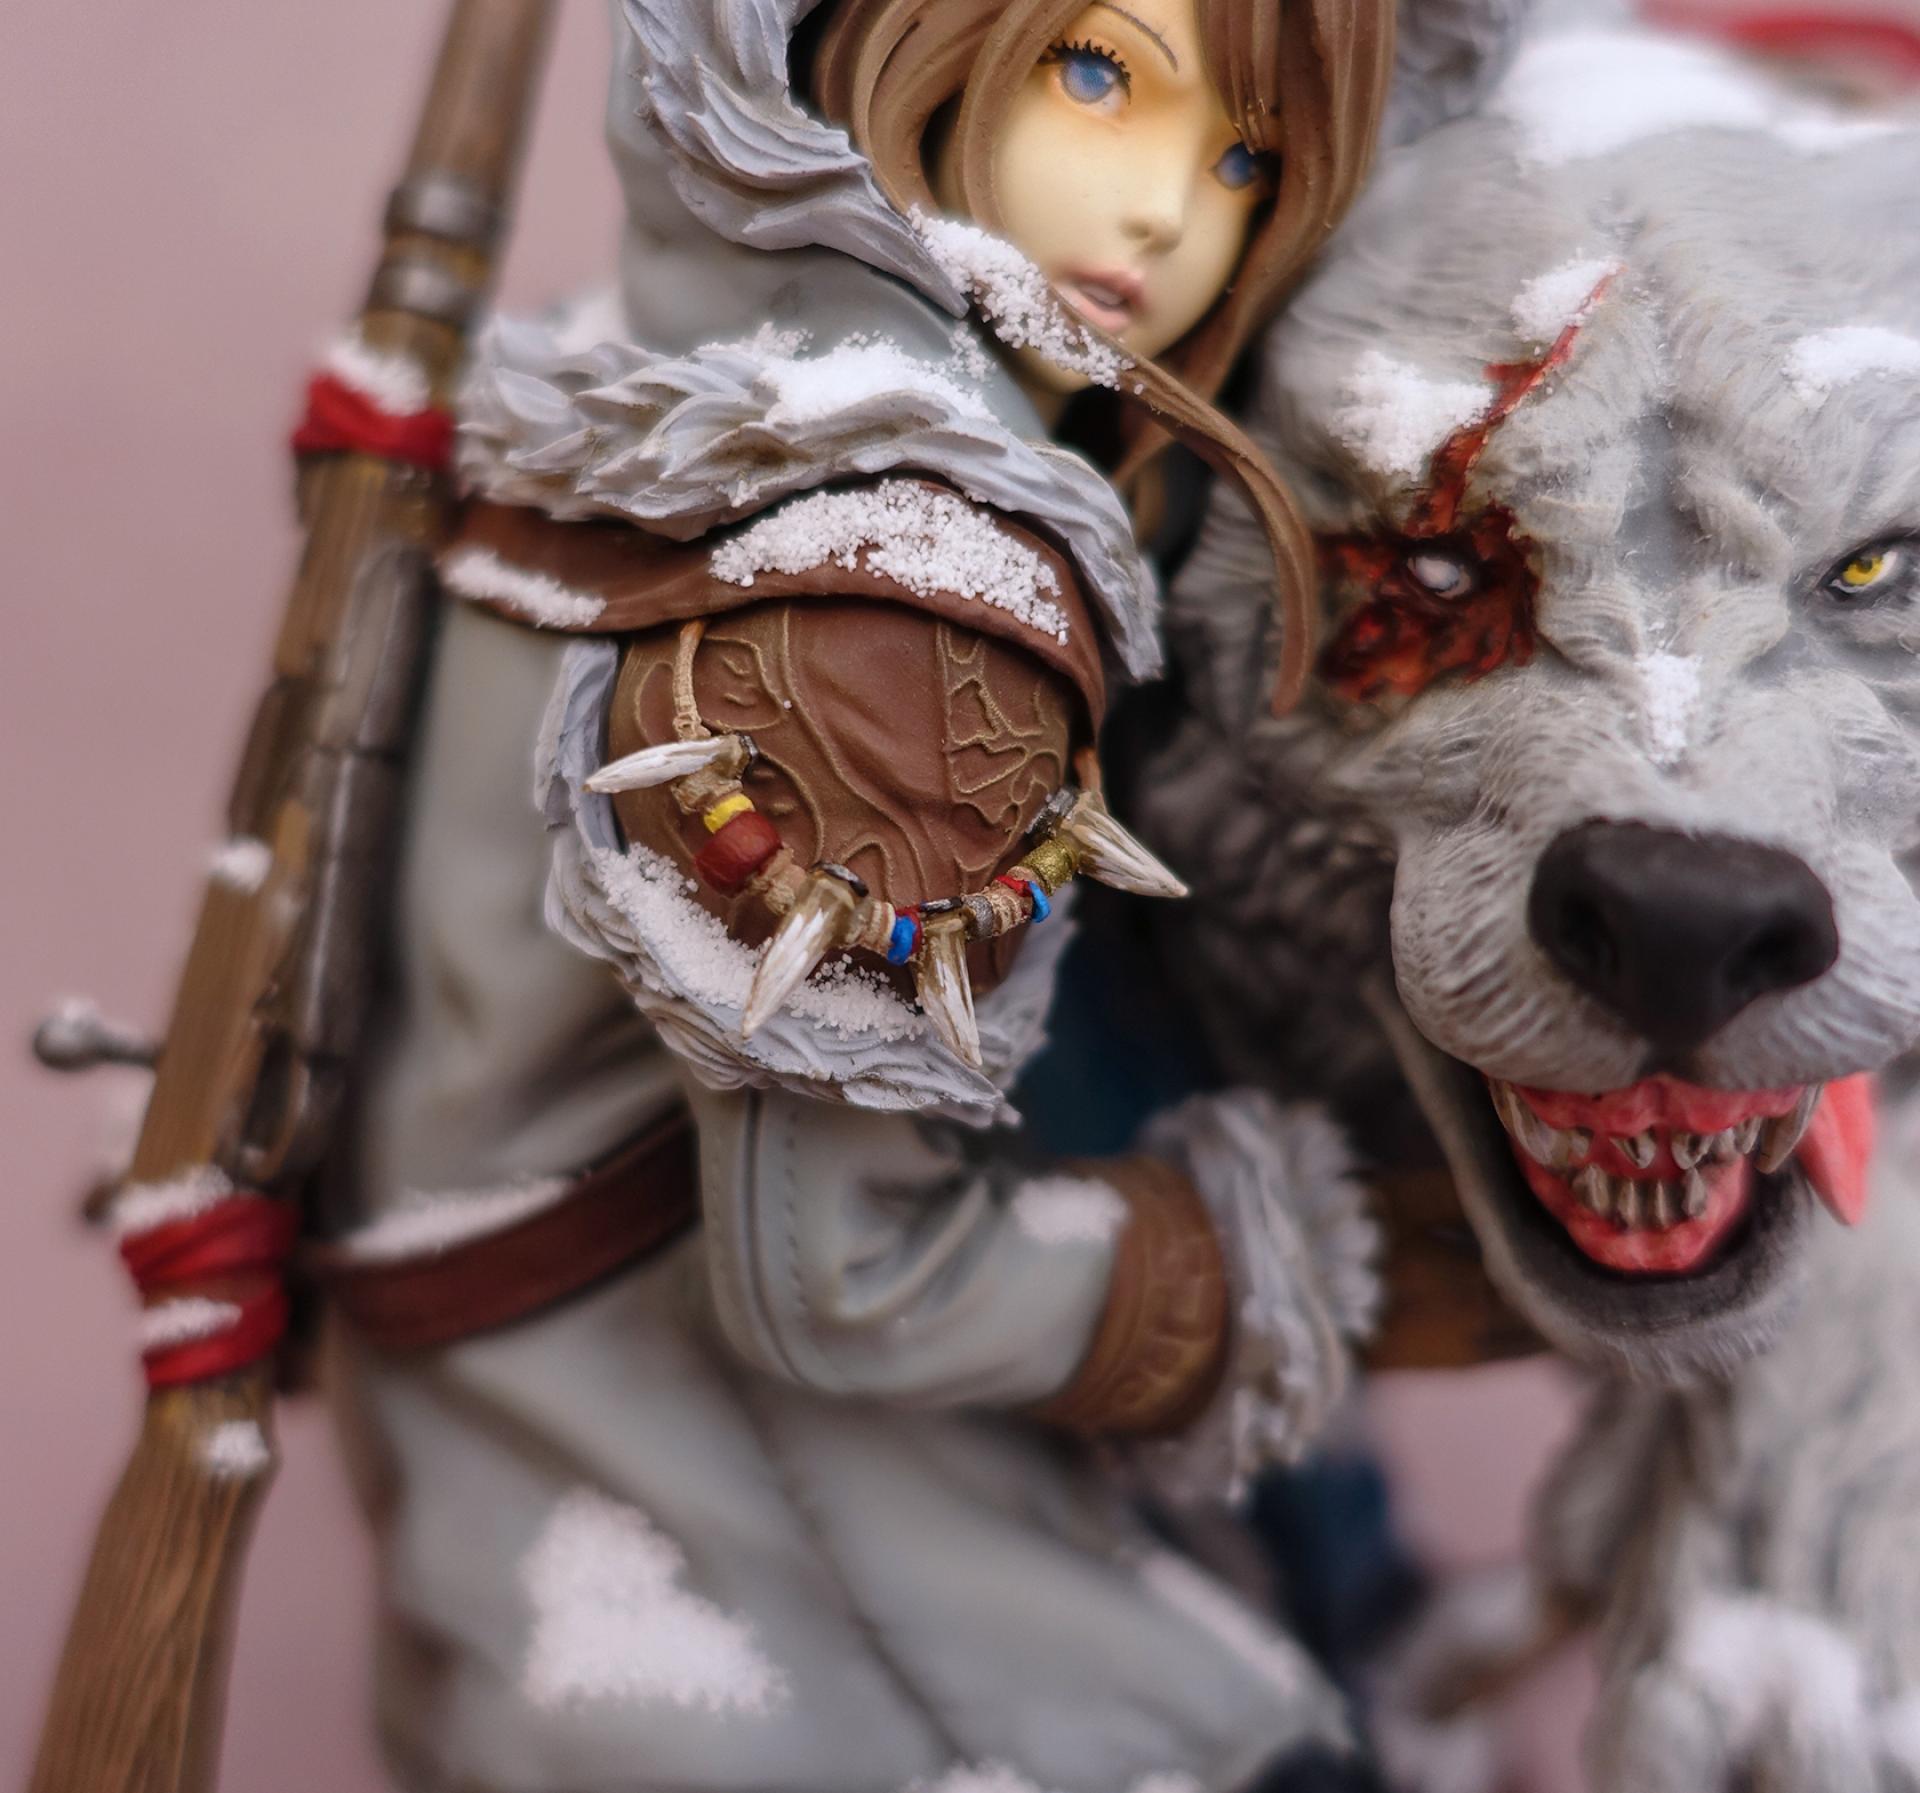 Wolf and Girl Bust - Original Character